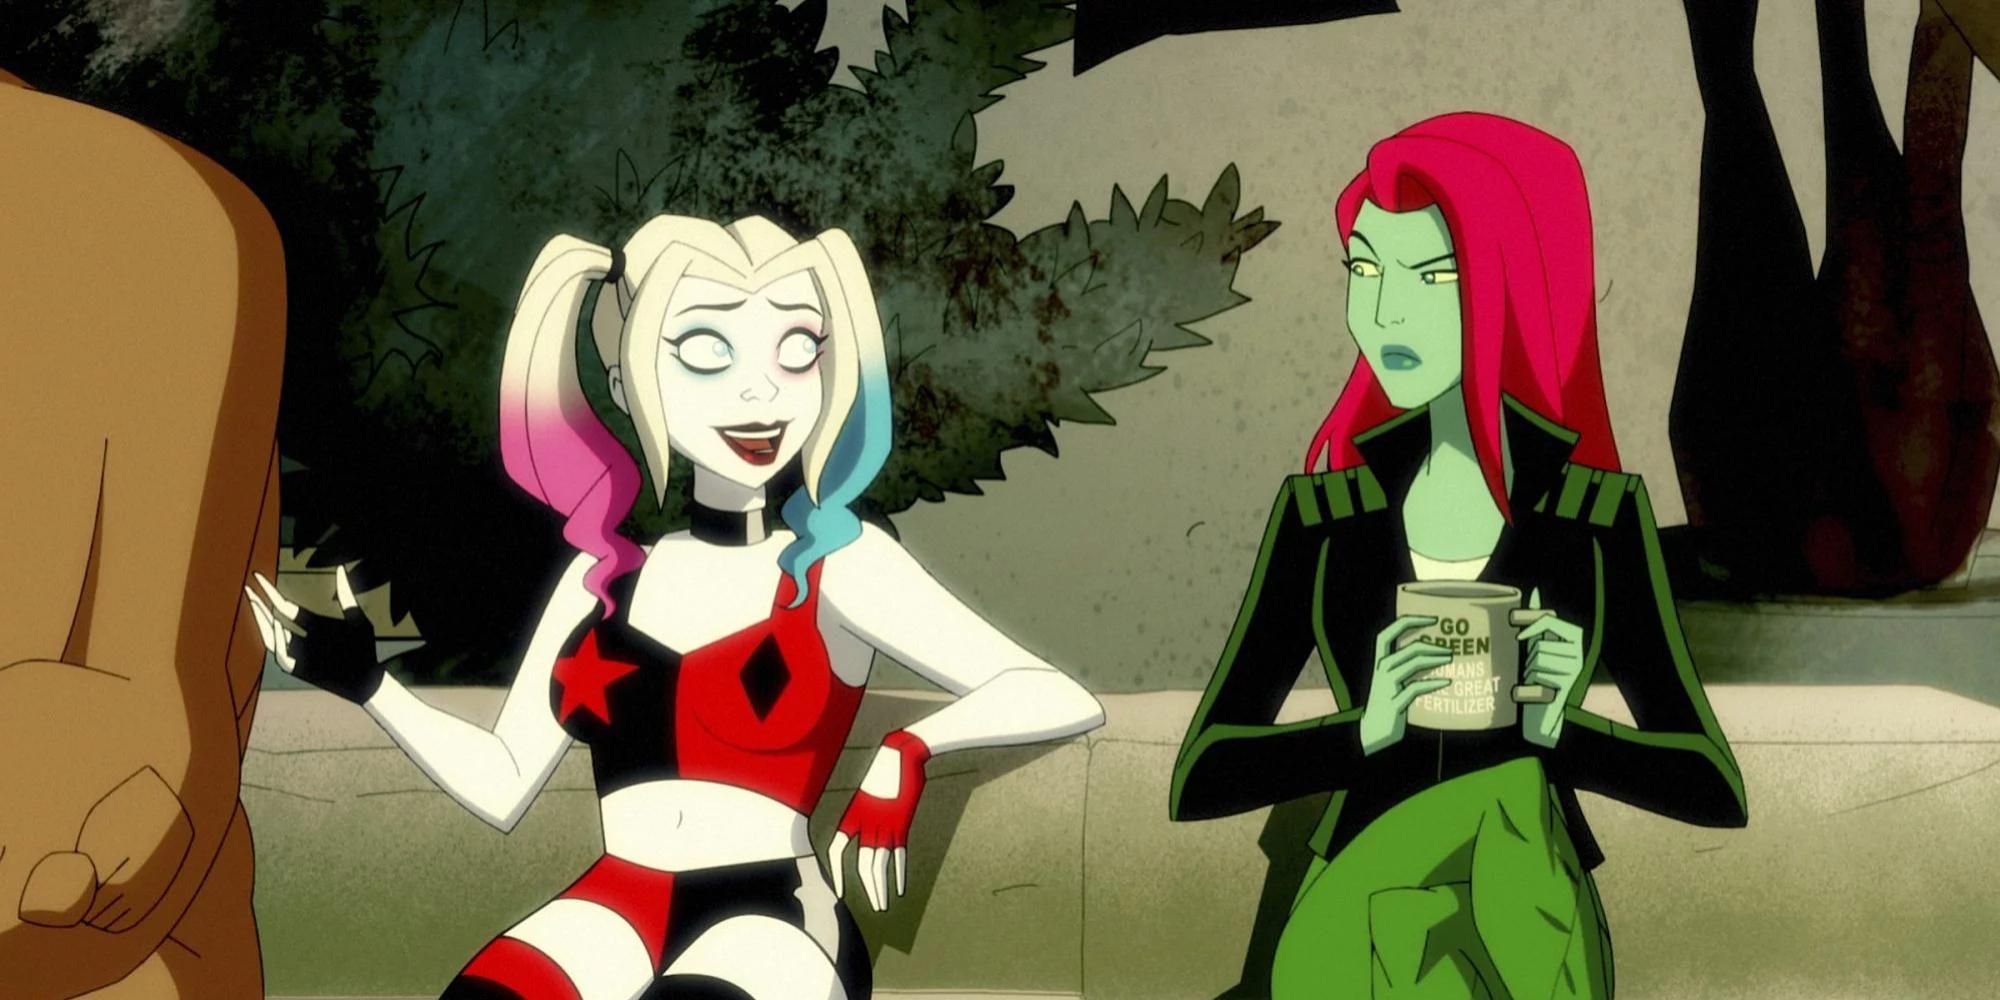 Harley Quinn and Poison Ivy sitting on a bench